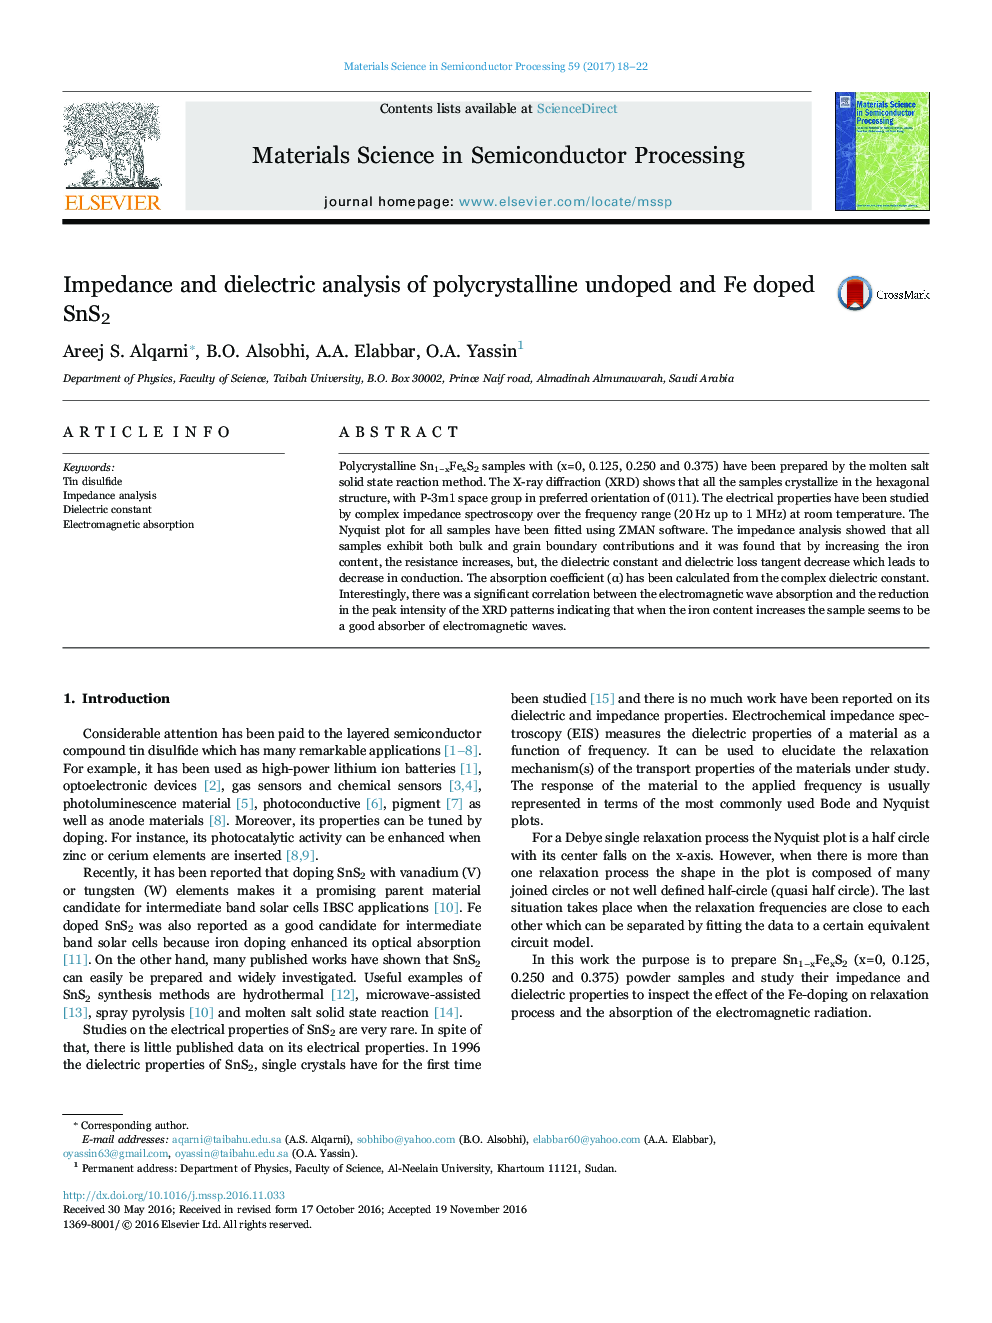 Impedance and dielectric analysis of polycrystalline undoped and Fe doped SnS2